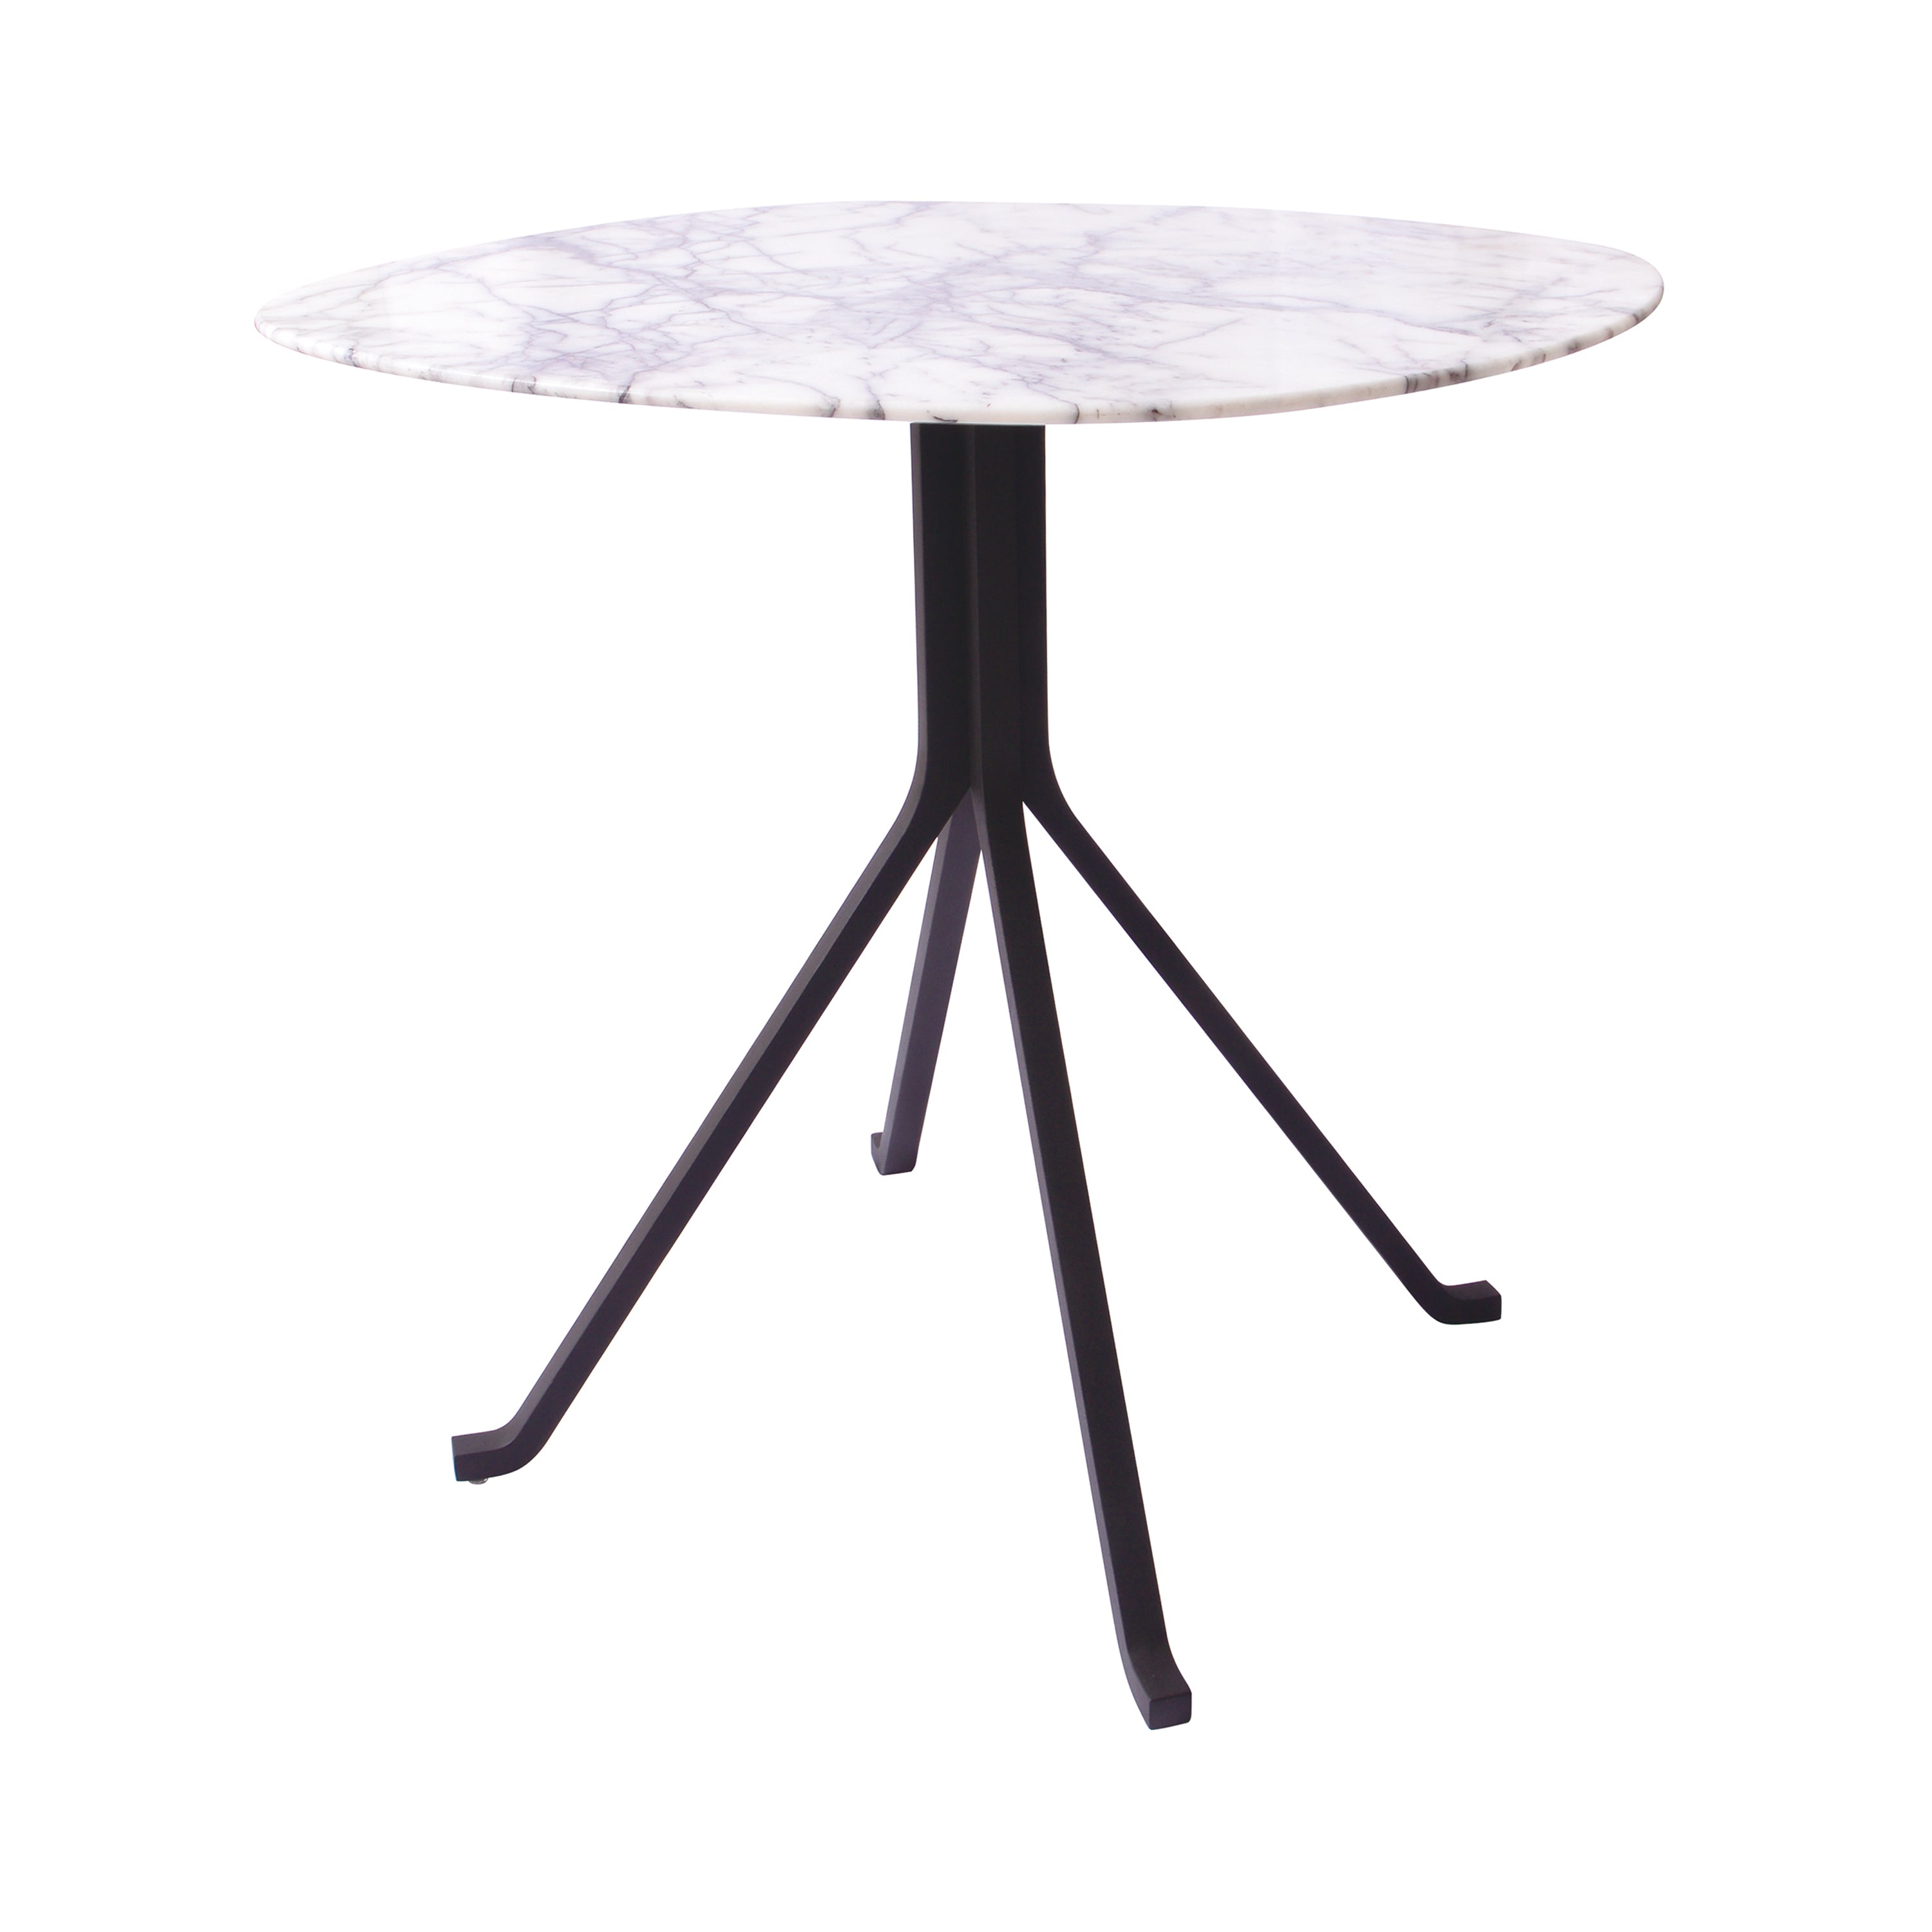 Blink Cafe Table: Stone Top + Lilac